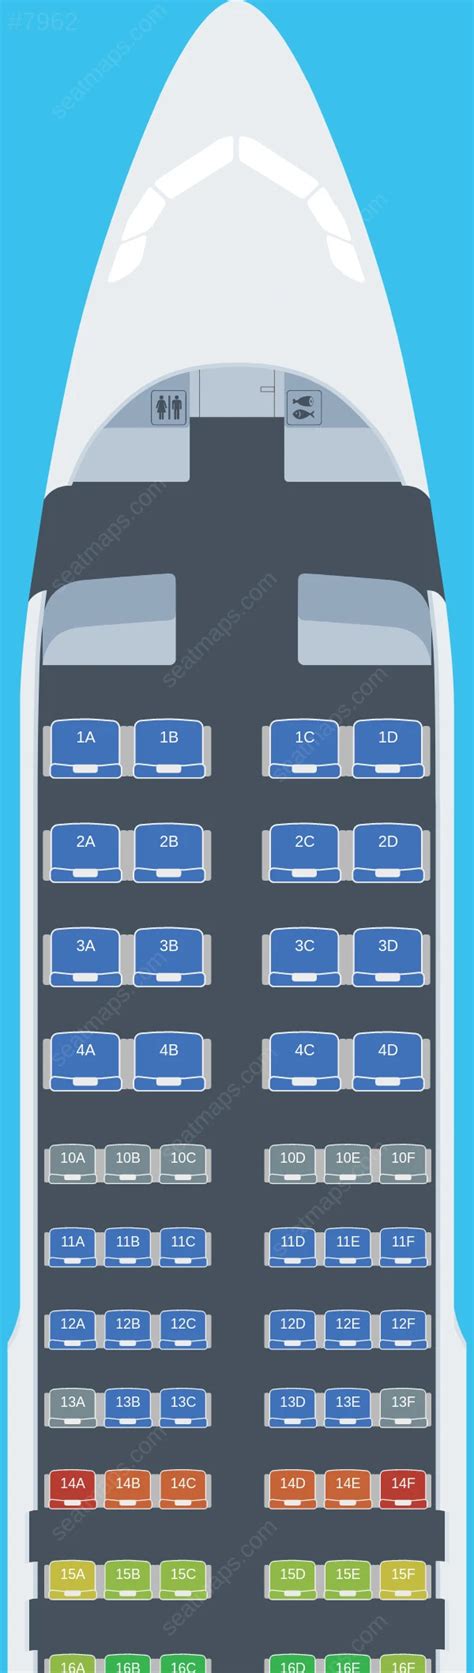 Seat Map Ratings Of Delta Airbus A320